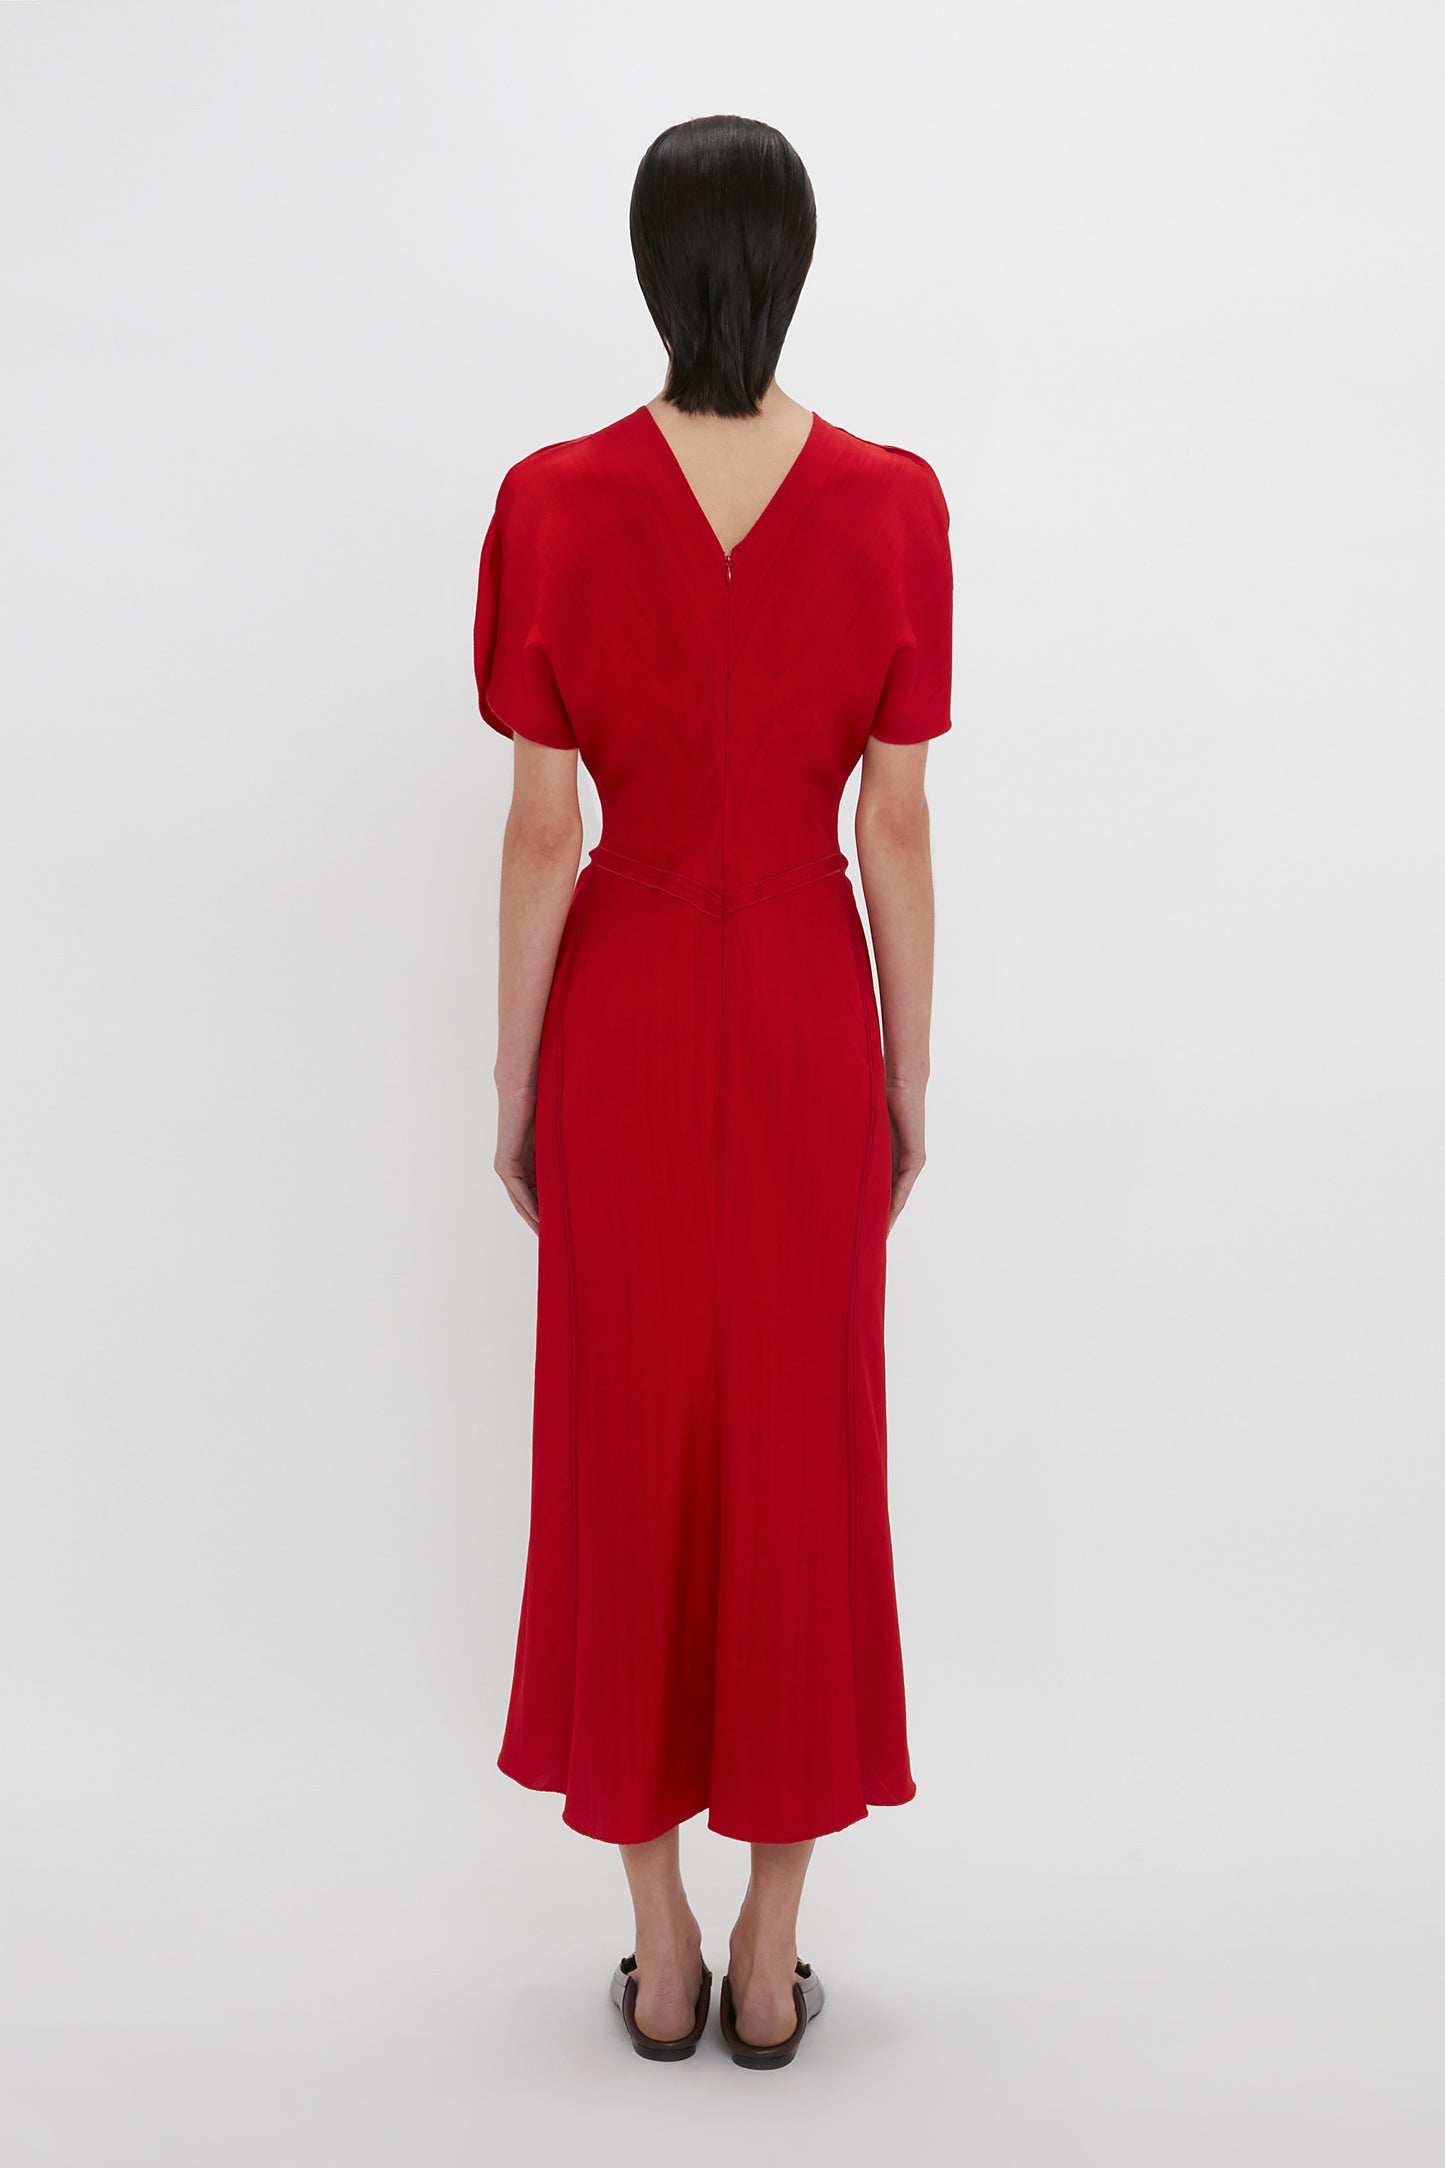 A woman stands with her back to the camera, wearing a Victoria Beckham red midi dress with short sleeves and a v-shaped neckline at the back. The dress features an elegant fit-and-flare silhouette.